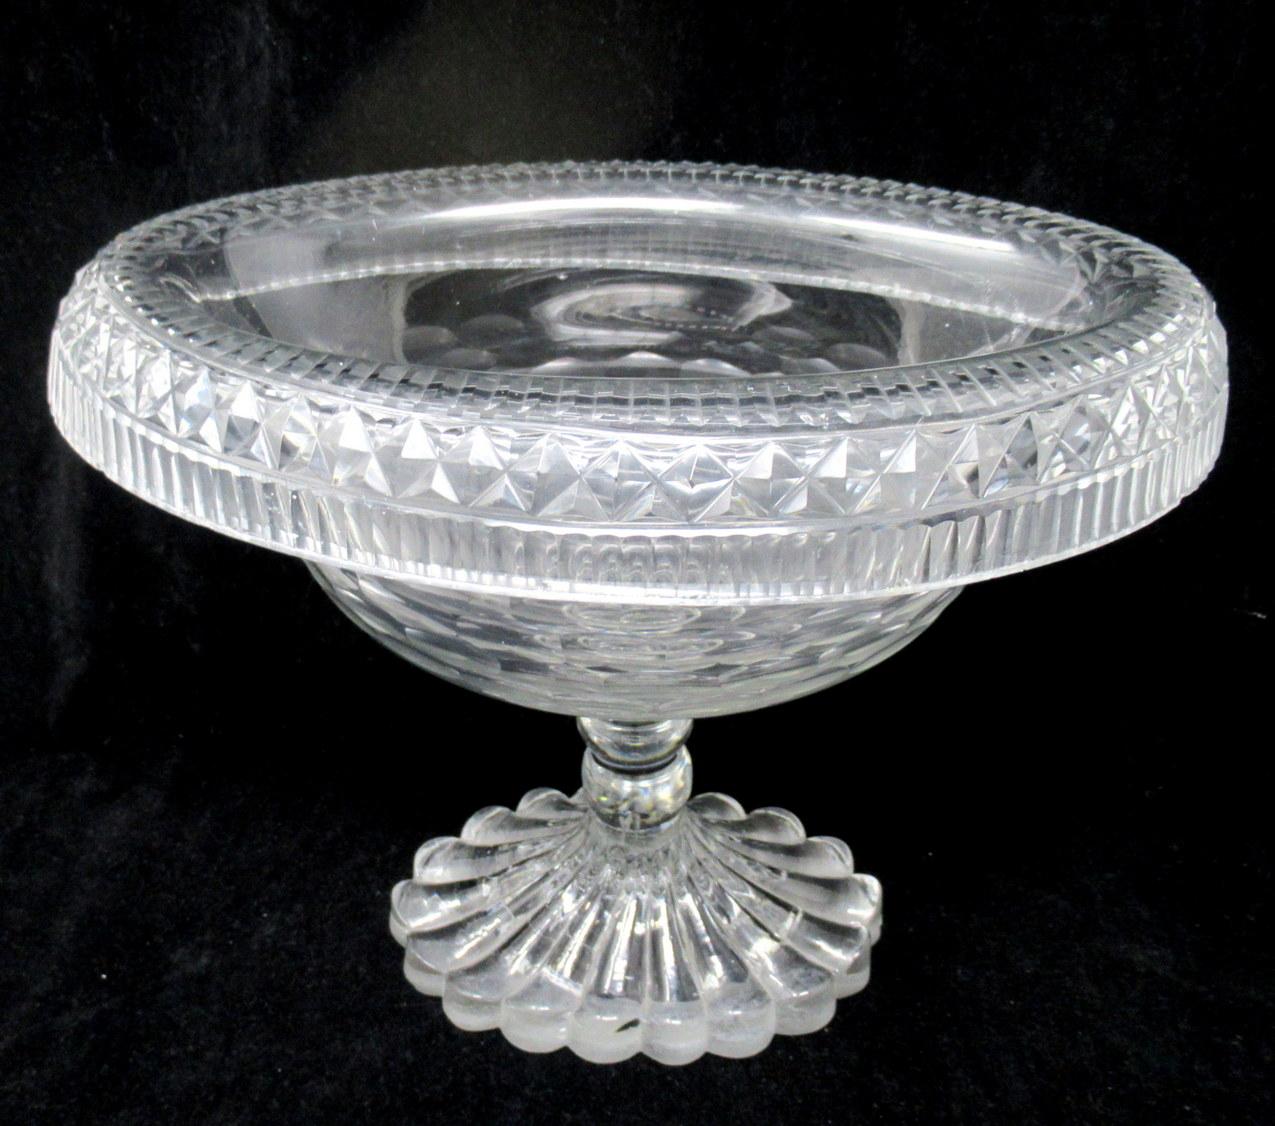 An impressive George III hand cut full led Irish Crystal Pedestal Turn-over Bowl of oval outline and unusually large proportions. Made by the Old Waterford Glass Company, County Tipperary in Ireland. Late Eighteenth, early nineteenth century.